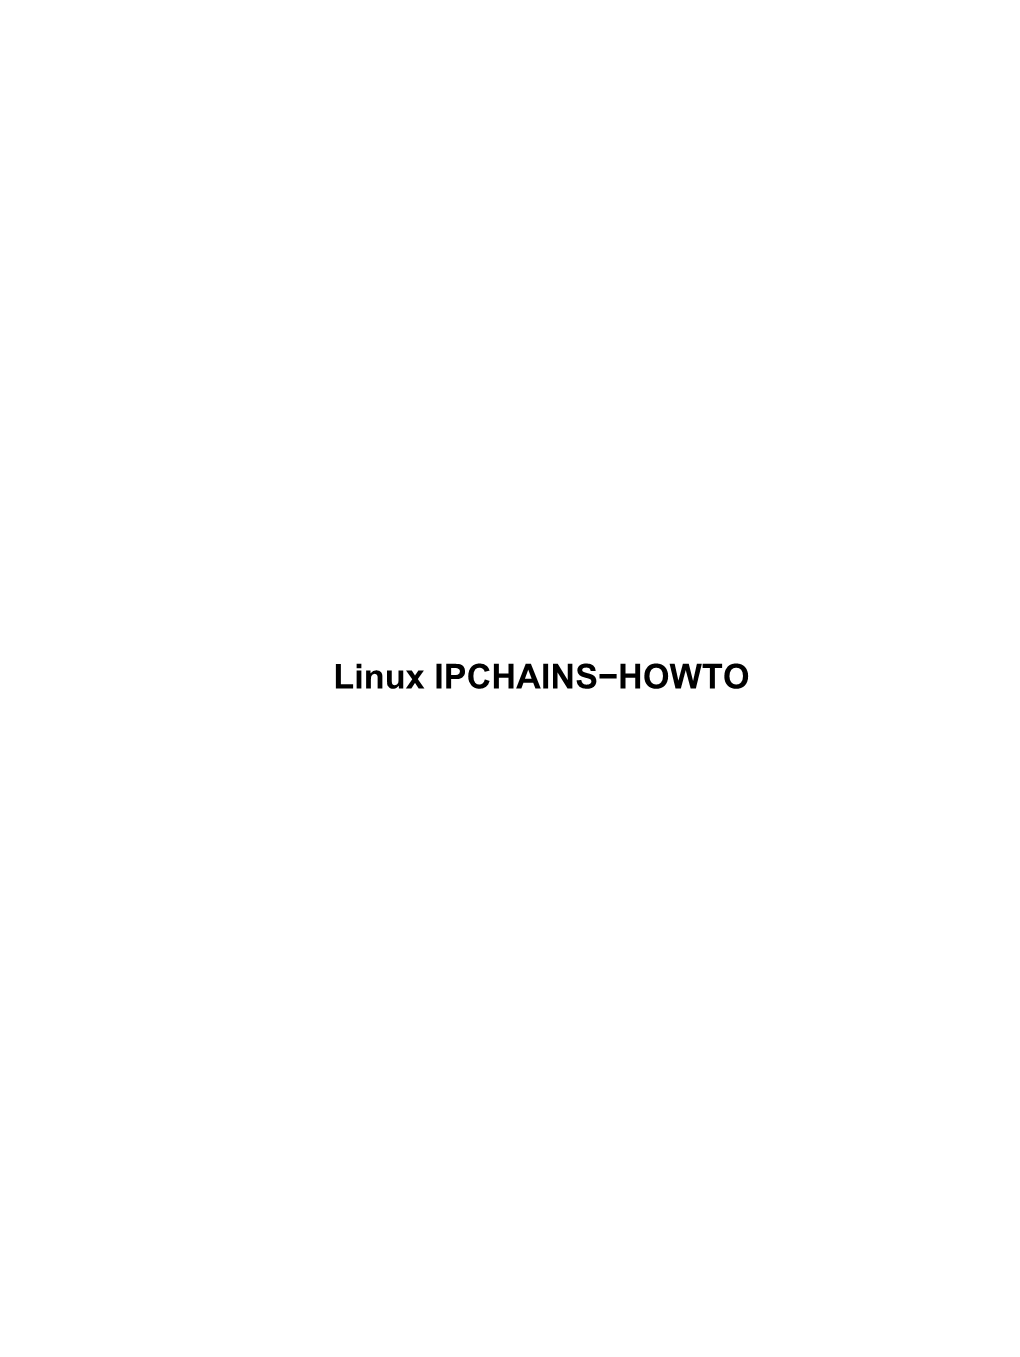 Linux IPCHAINS-HOWTO